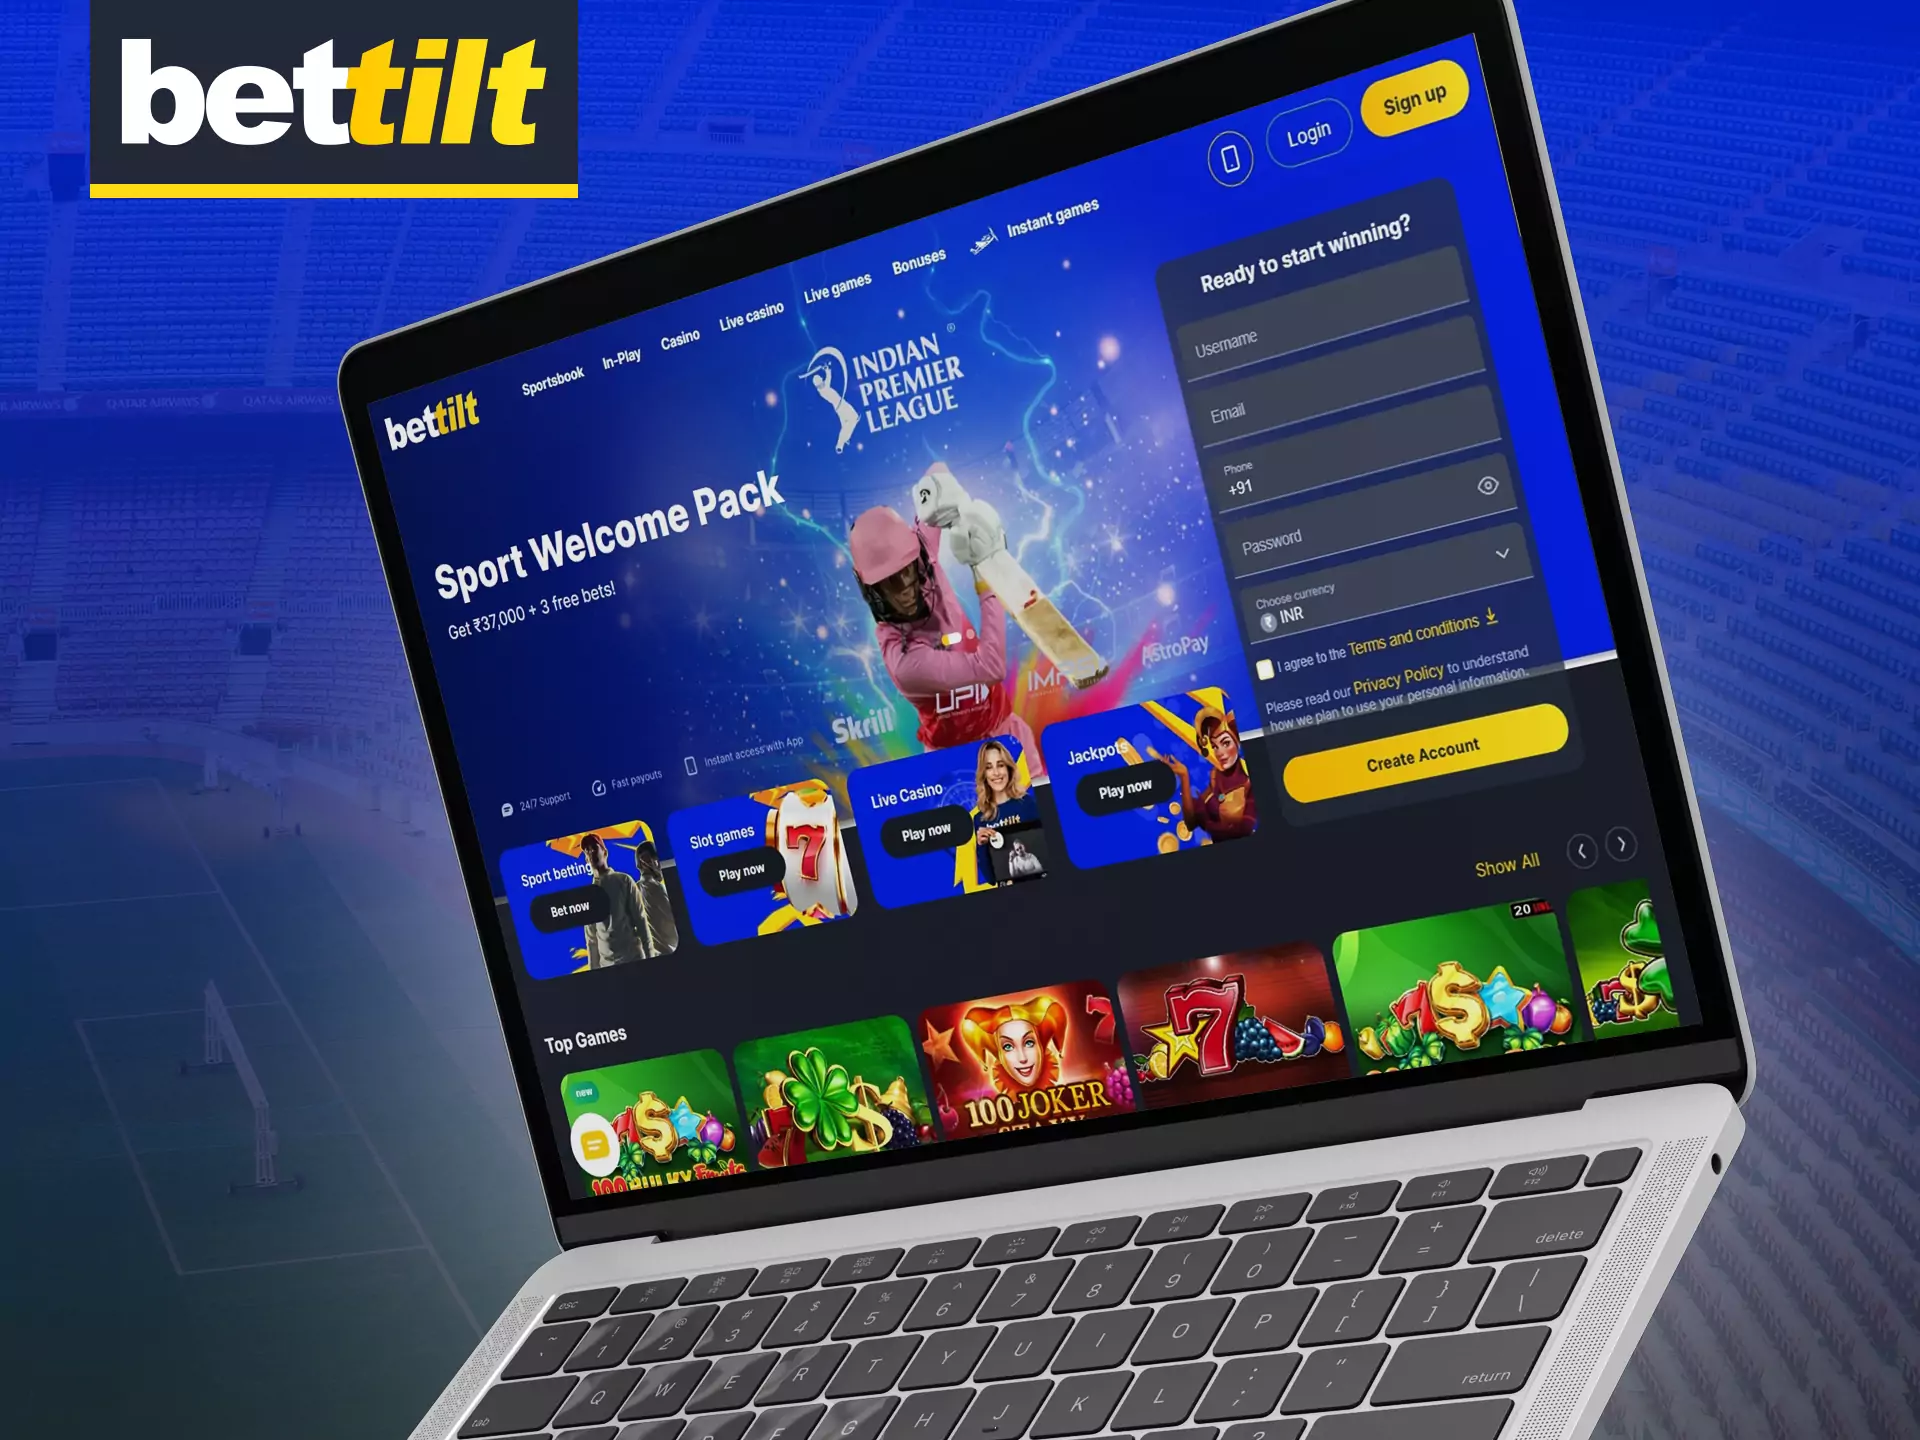 Make your bets and play on the official Bettilt website.